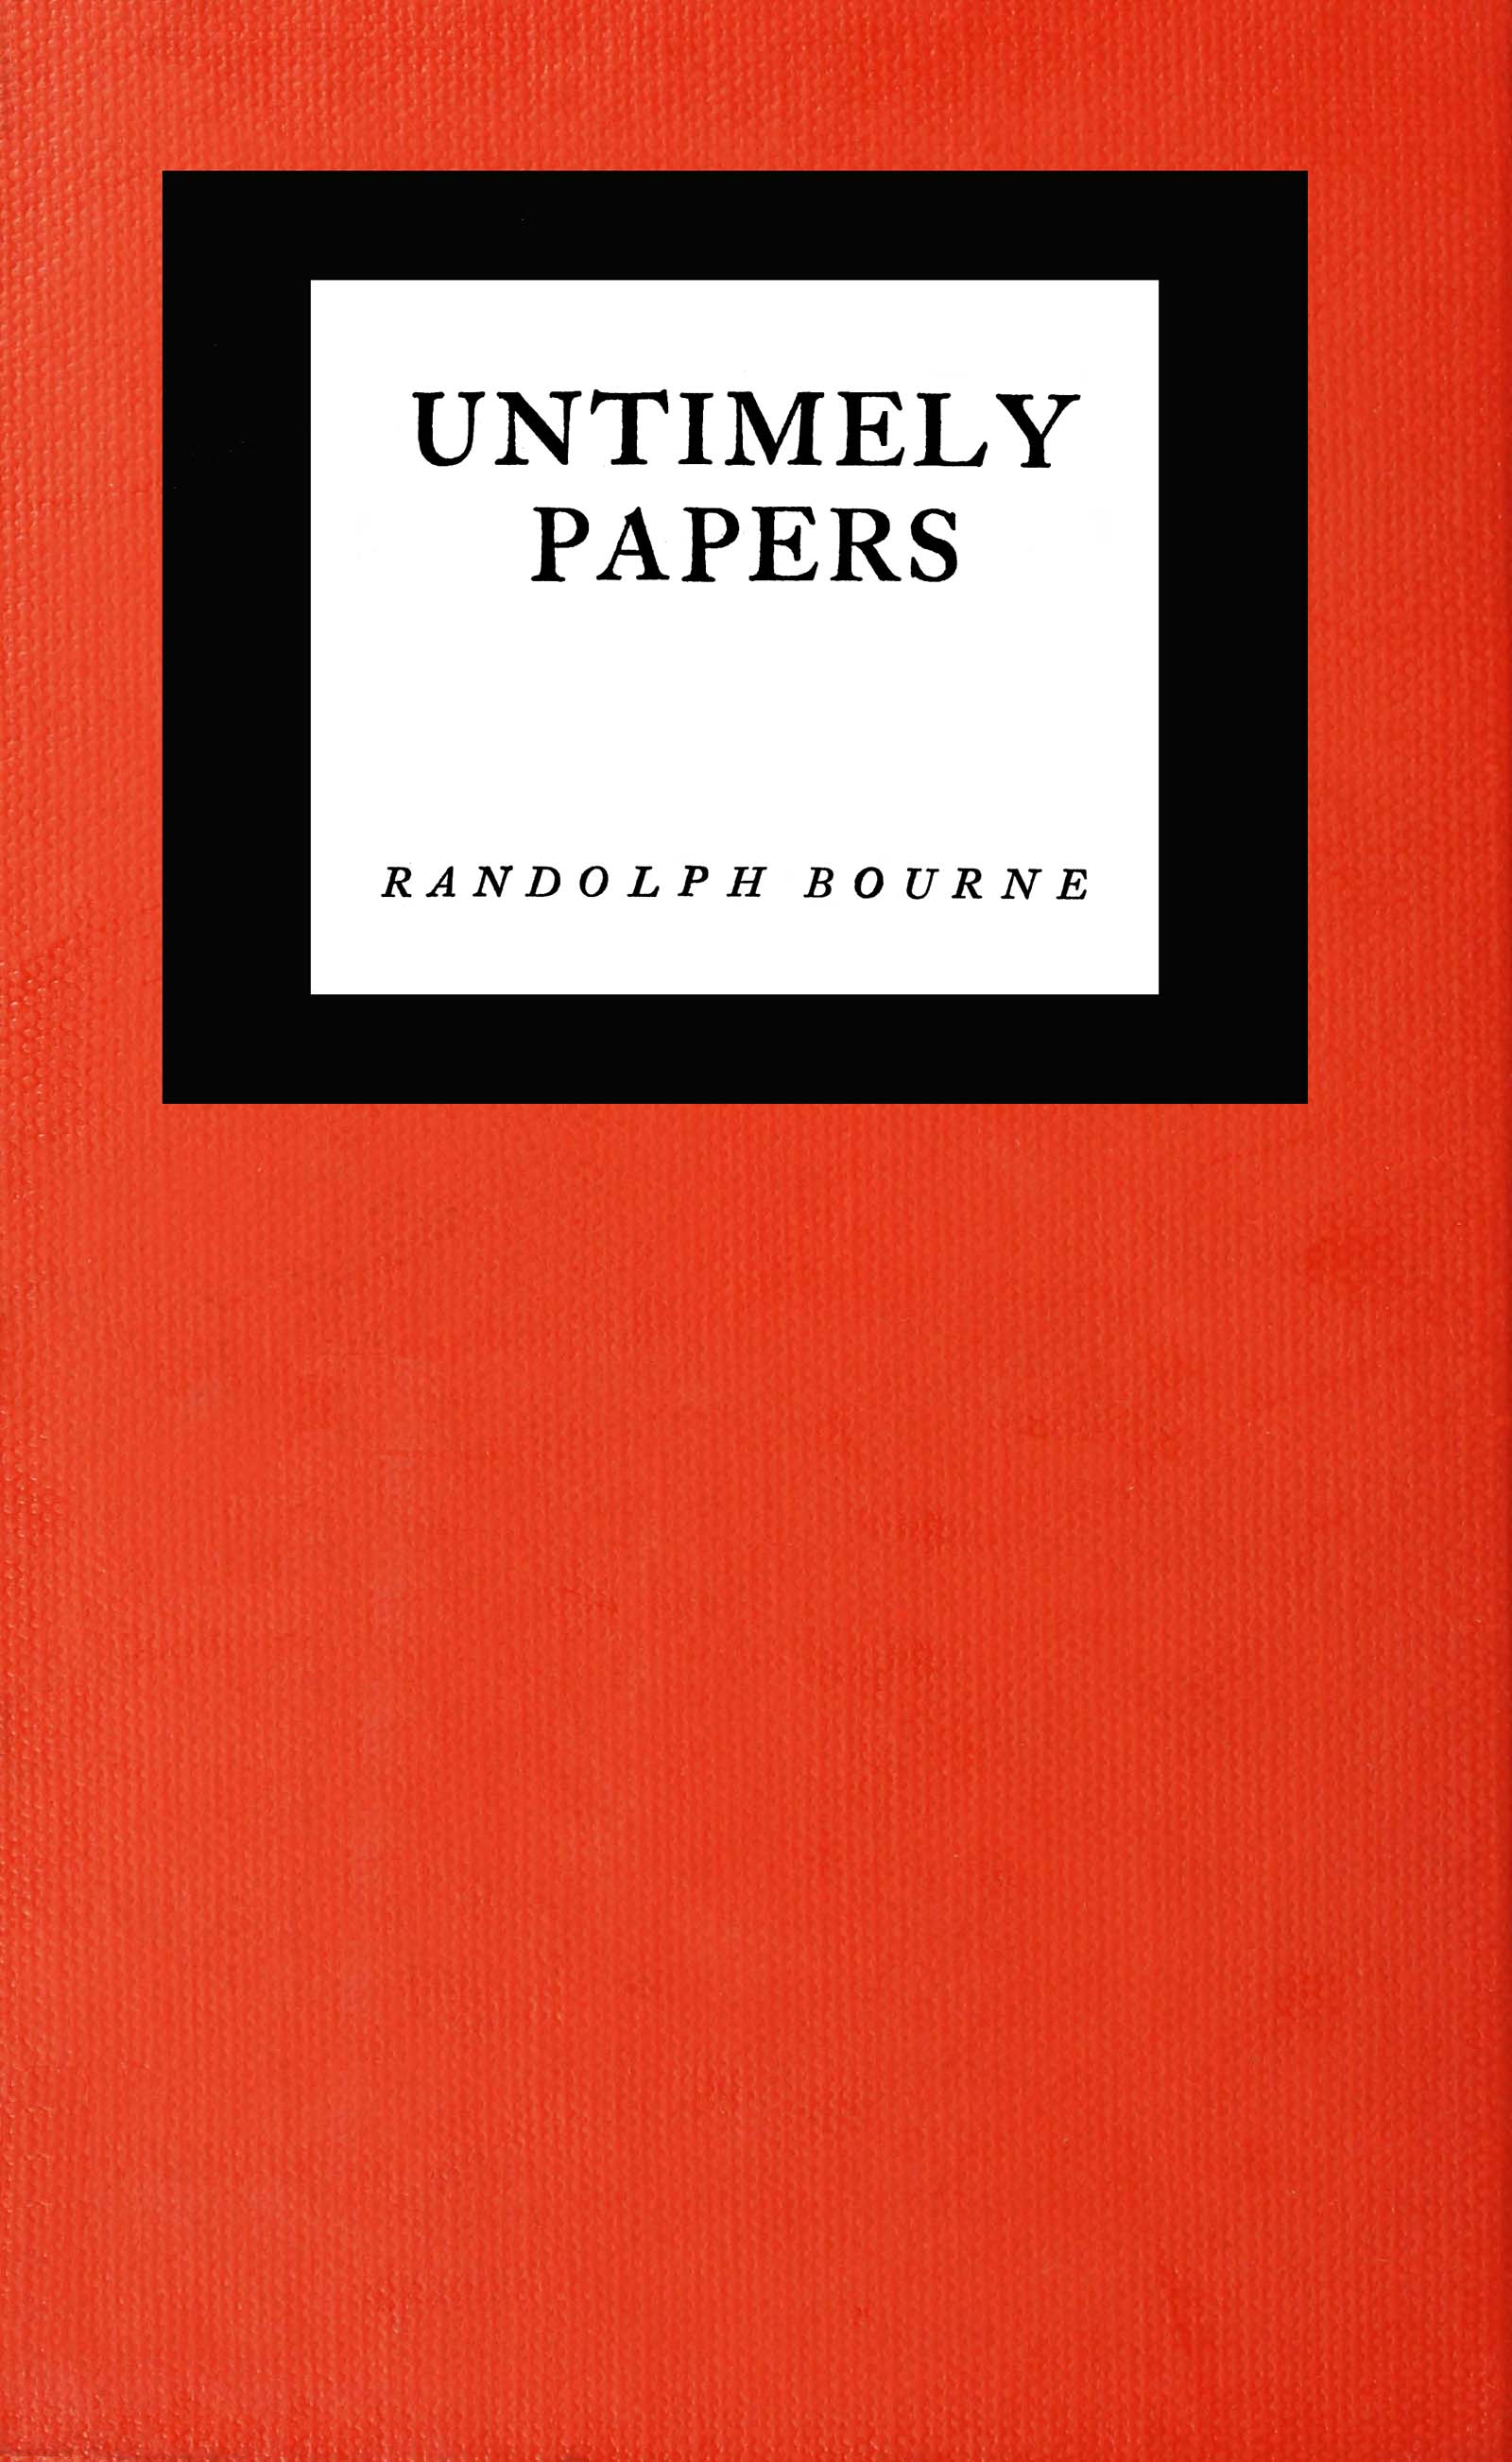 Untimely papers, by Randolph Bourne—A Project Gutenberg eBook pic